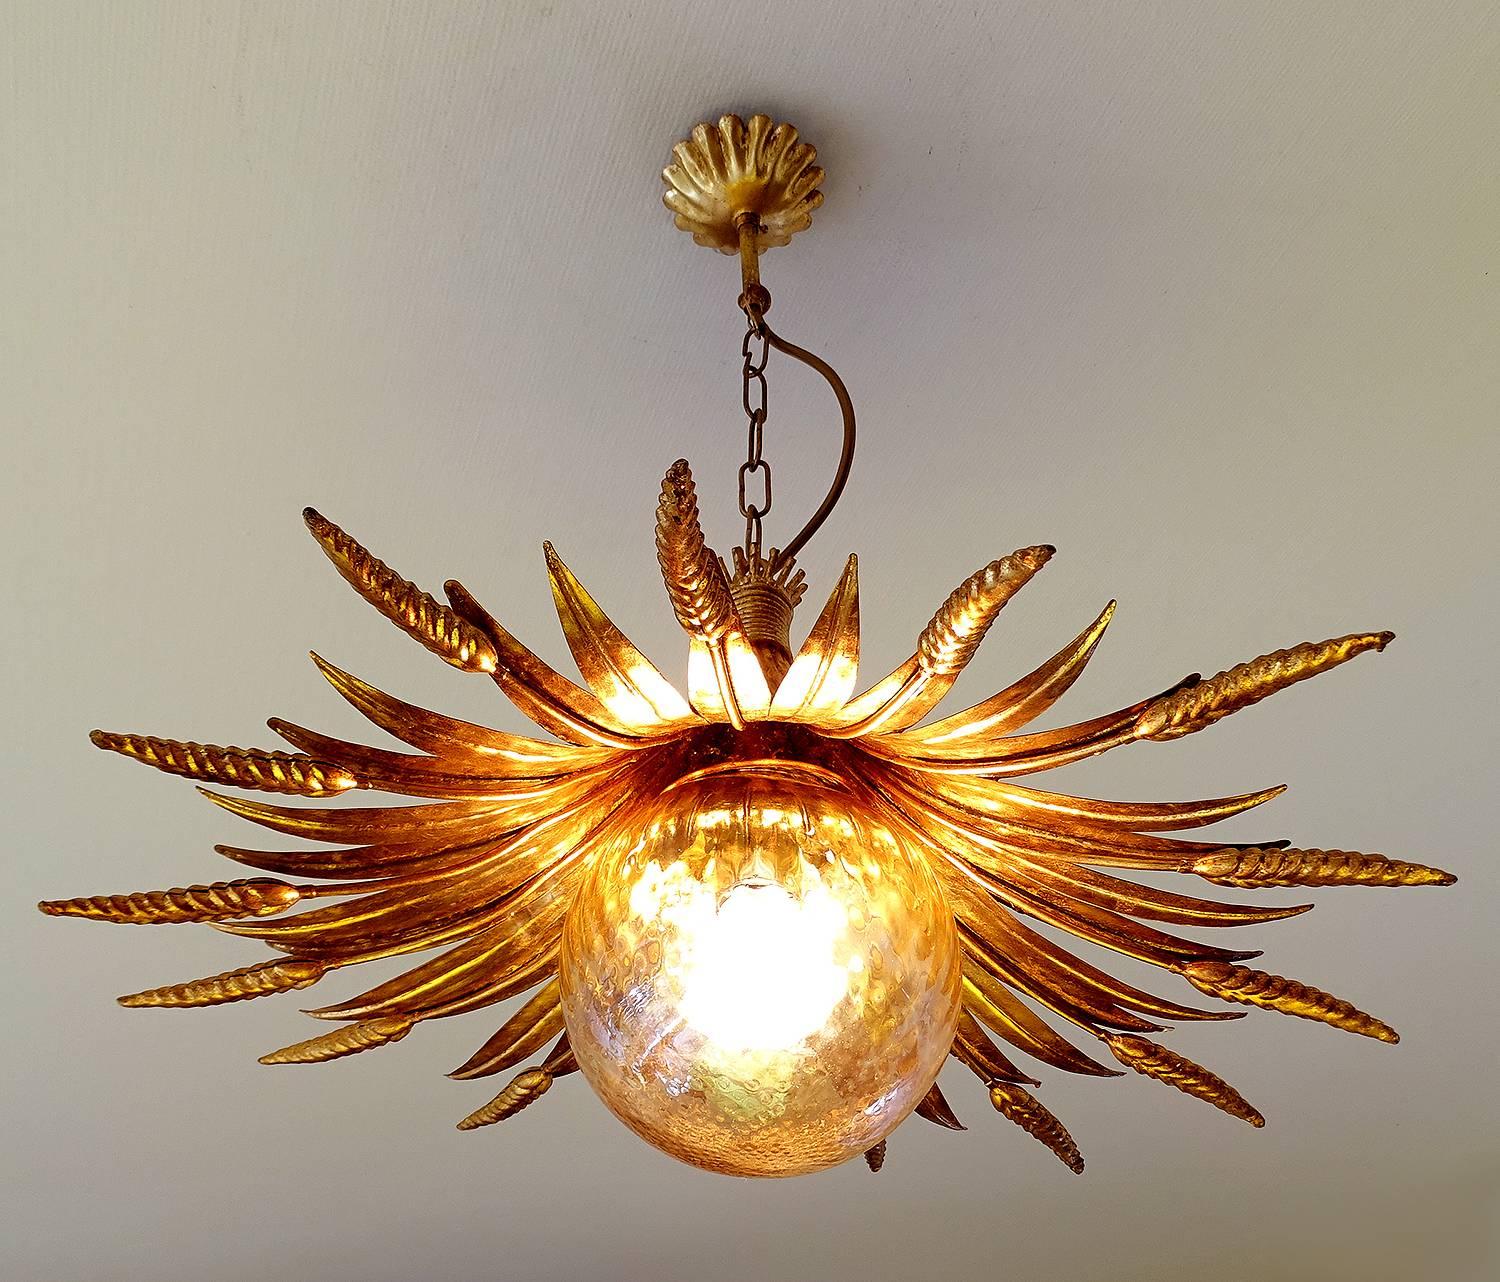 Large Sheaf Wheat chandelier arranged in a sunburst pattern, circa 1965s.
gold tinted blown glass globe with slight iridescent surface
The chandelier brings a cozy atmosphere in every room. 

Dimensions
21.65 in.H / 55 cmH
Diameter
21.65 in. (55